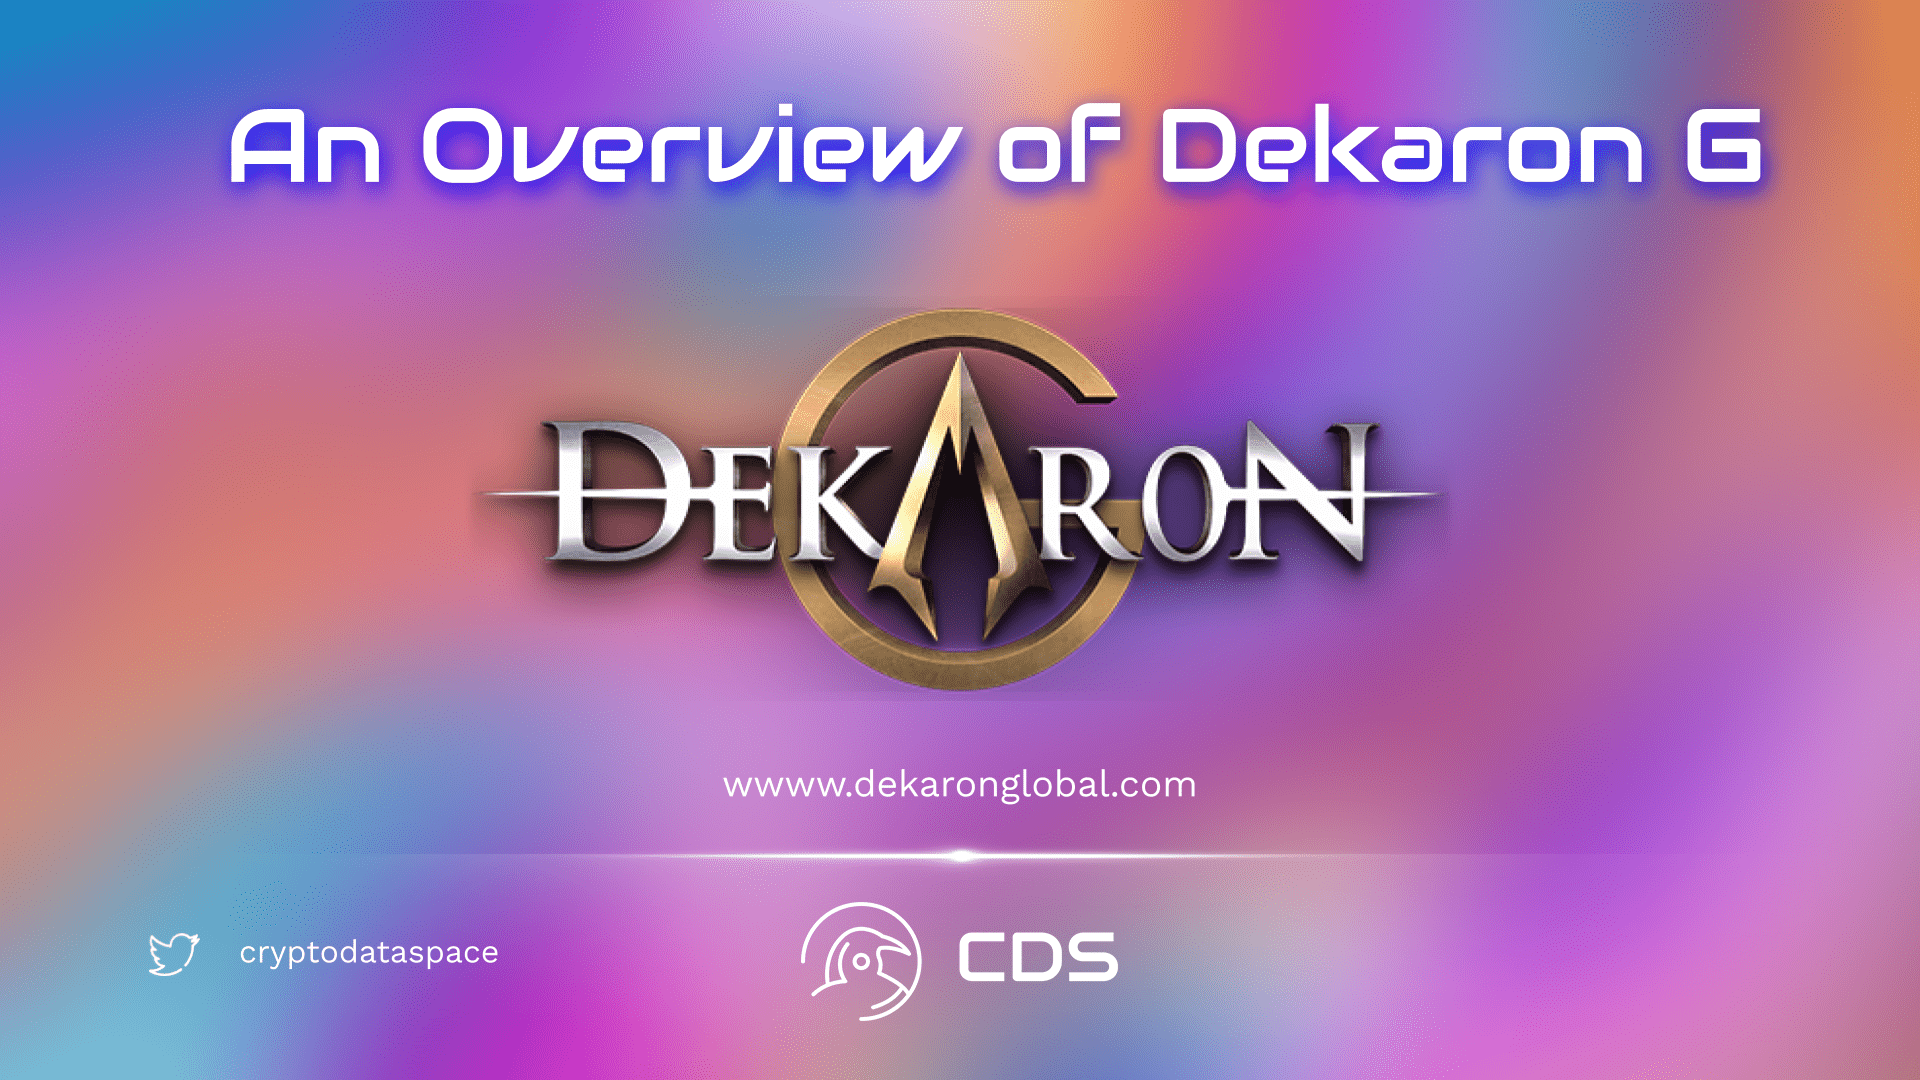 An Overview of Dekaron G